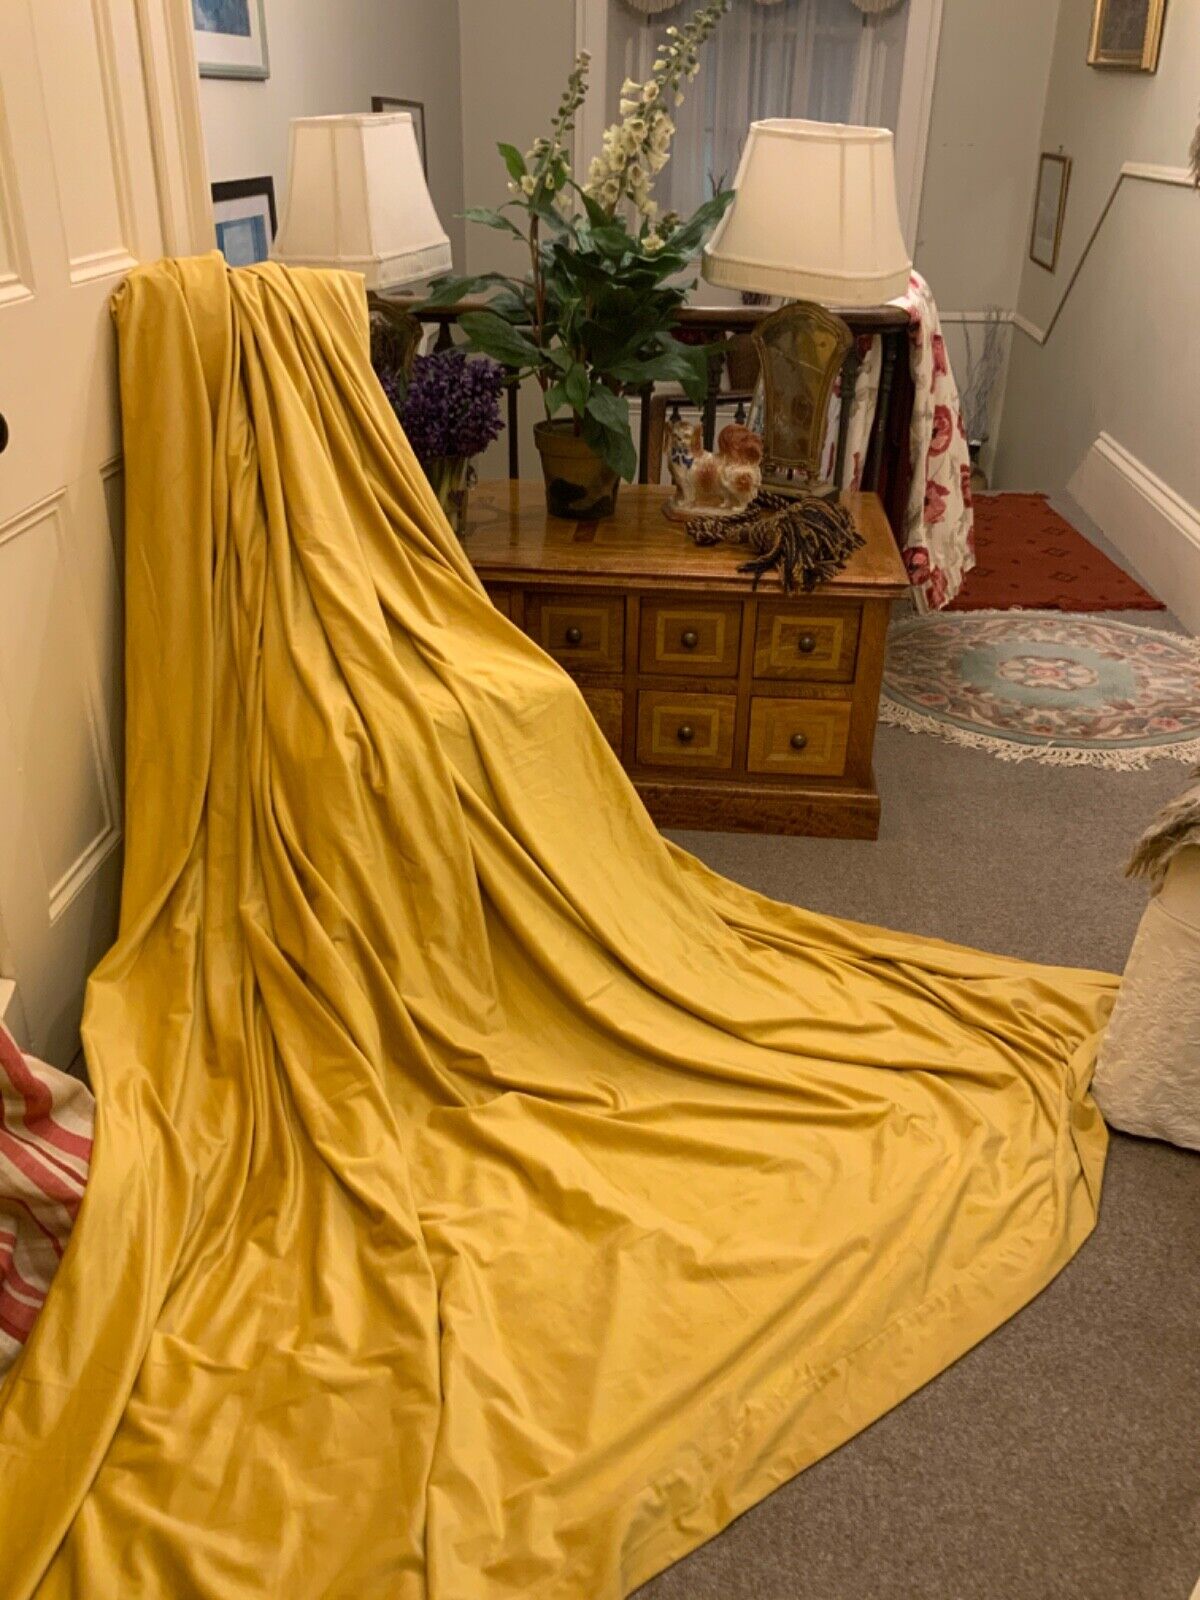 HUGE PAIR OF CONTEMPORARY YELLOW GOLD LINED VELVET CURTAINS 90in W X 90in LONG Duża popularność